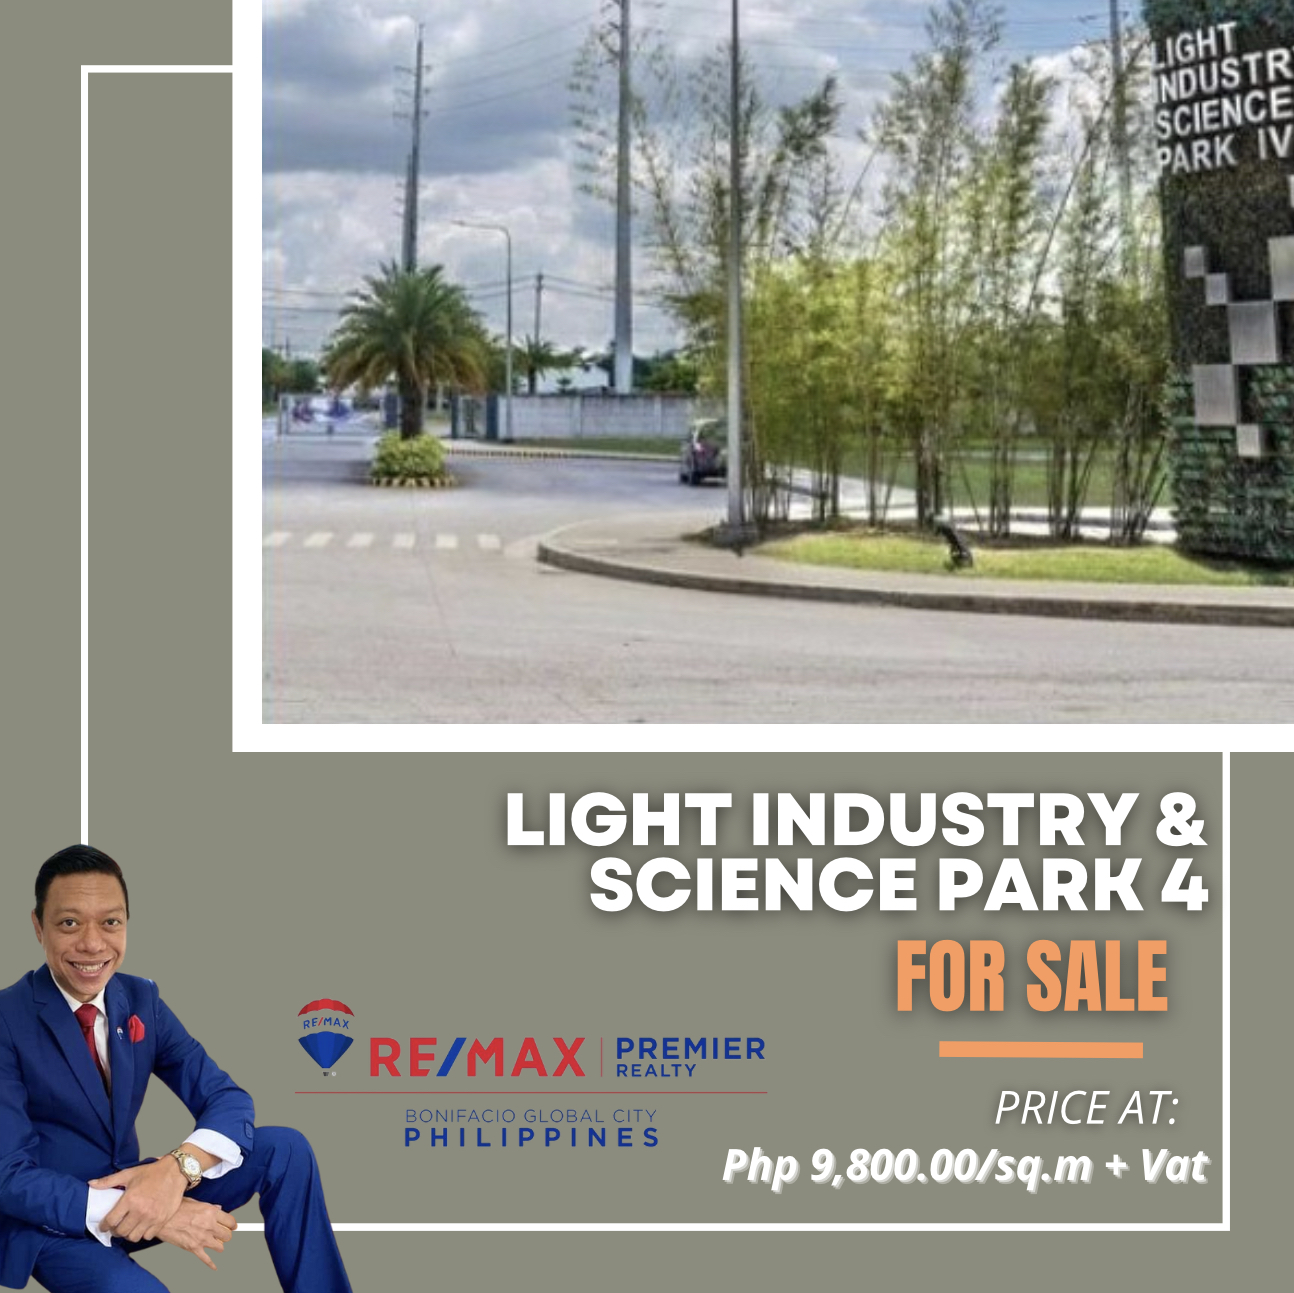 INDUSTRIAL LOT FOR SALE  in Light Industry & Science Park 4‼️